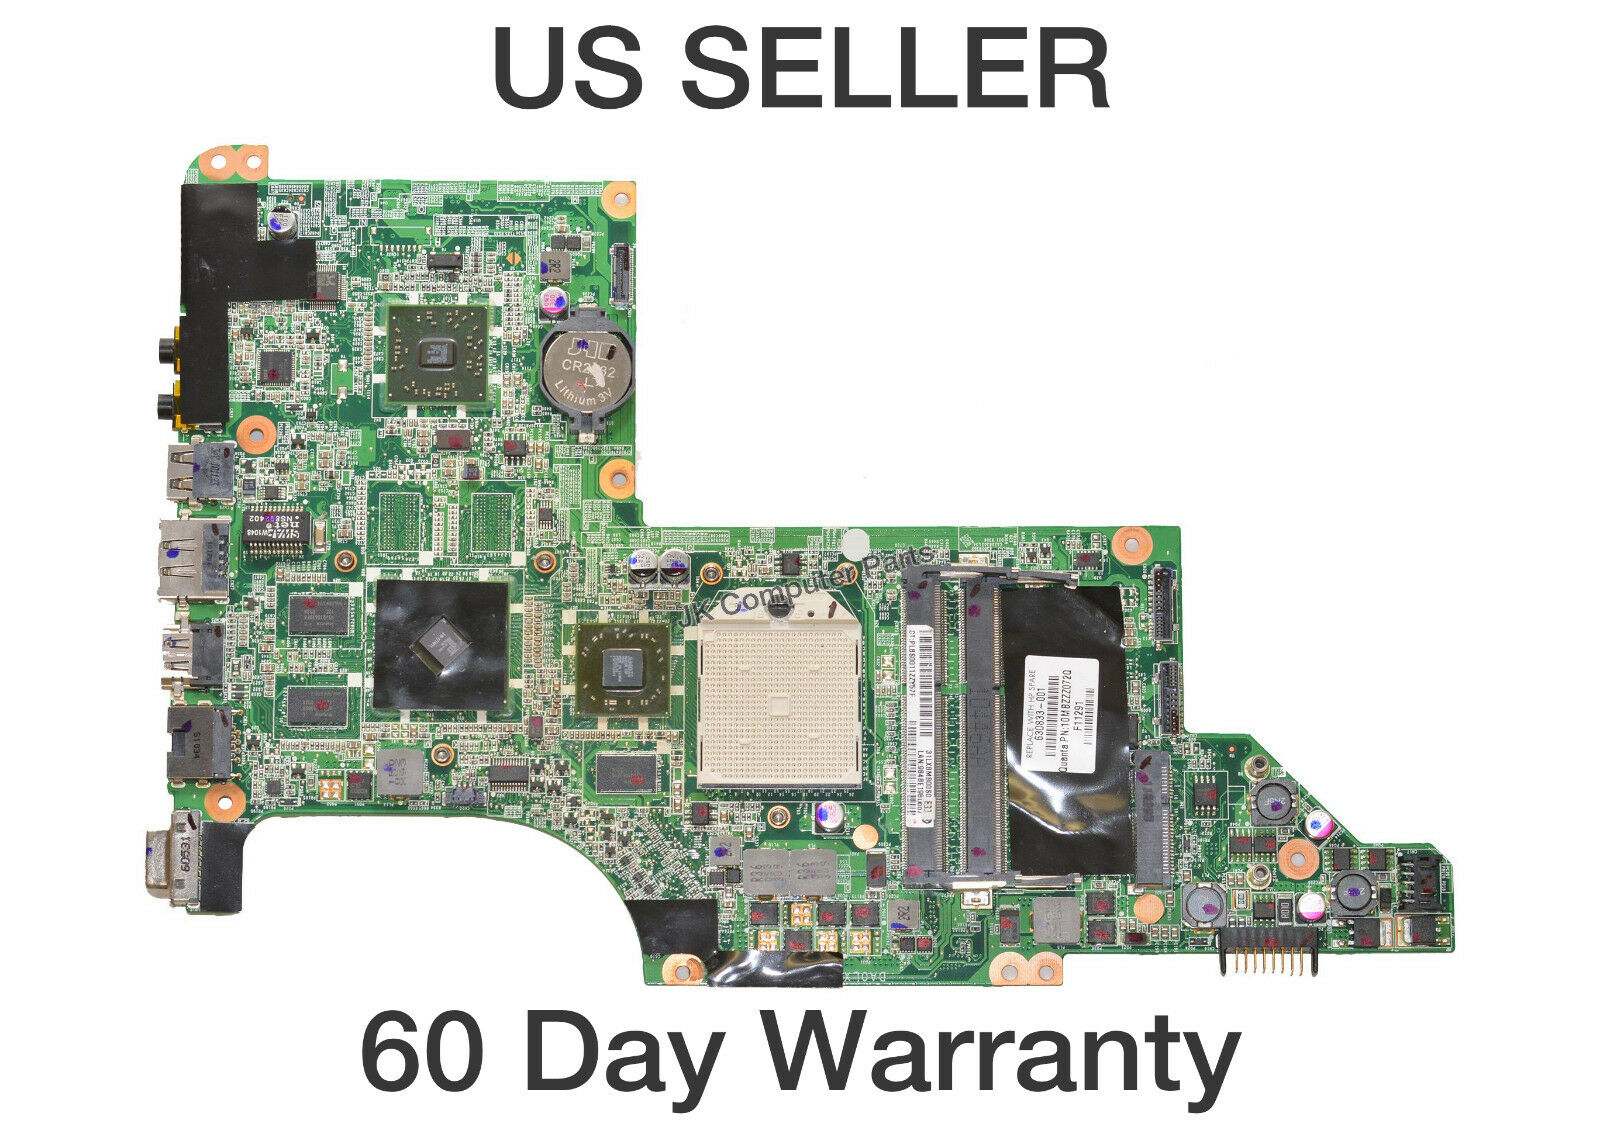 HP DV7-4267CL DV7-4270US DV7-4273US AMD Laptop Motherboard s1 630833-001 Brand: HP Compatible CPU Brand: AM